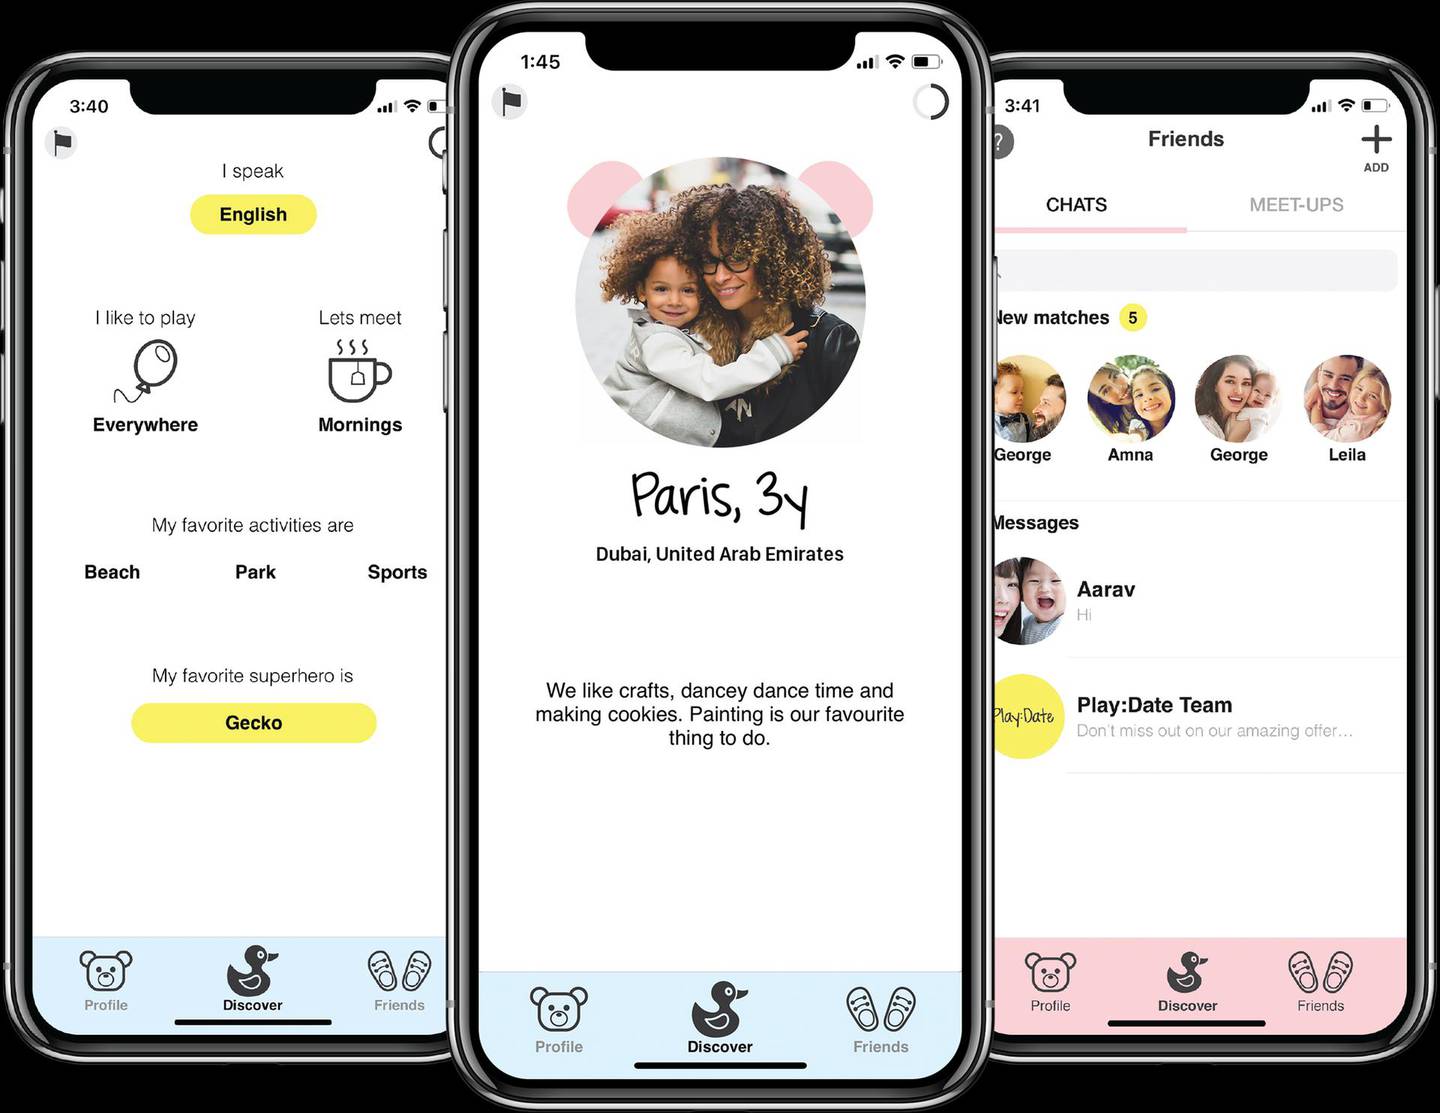 The Play:Date app allows parents to create profiles for their kids 